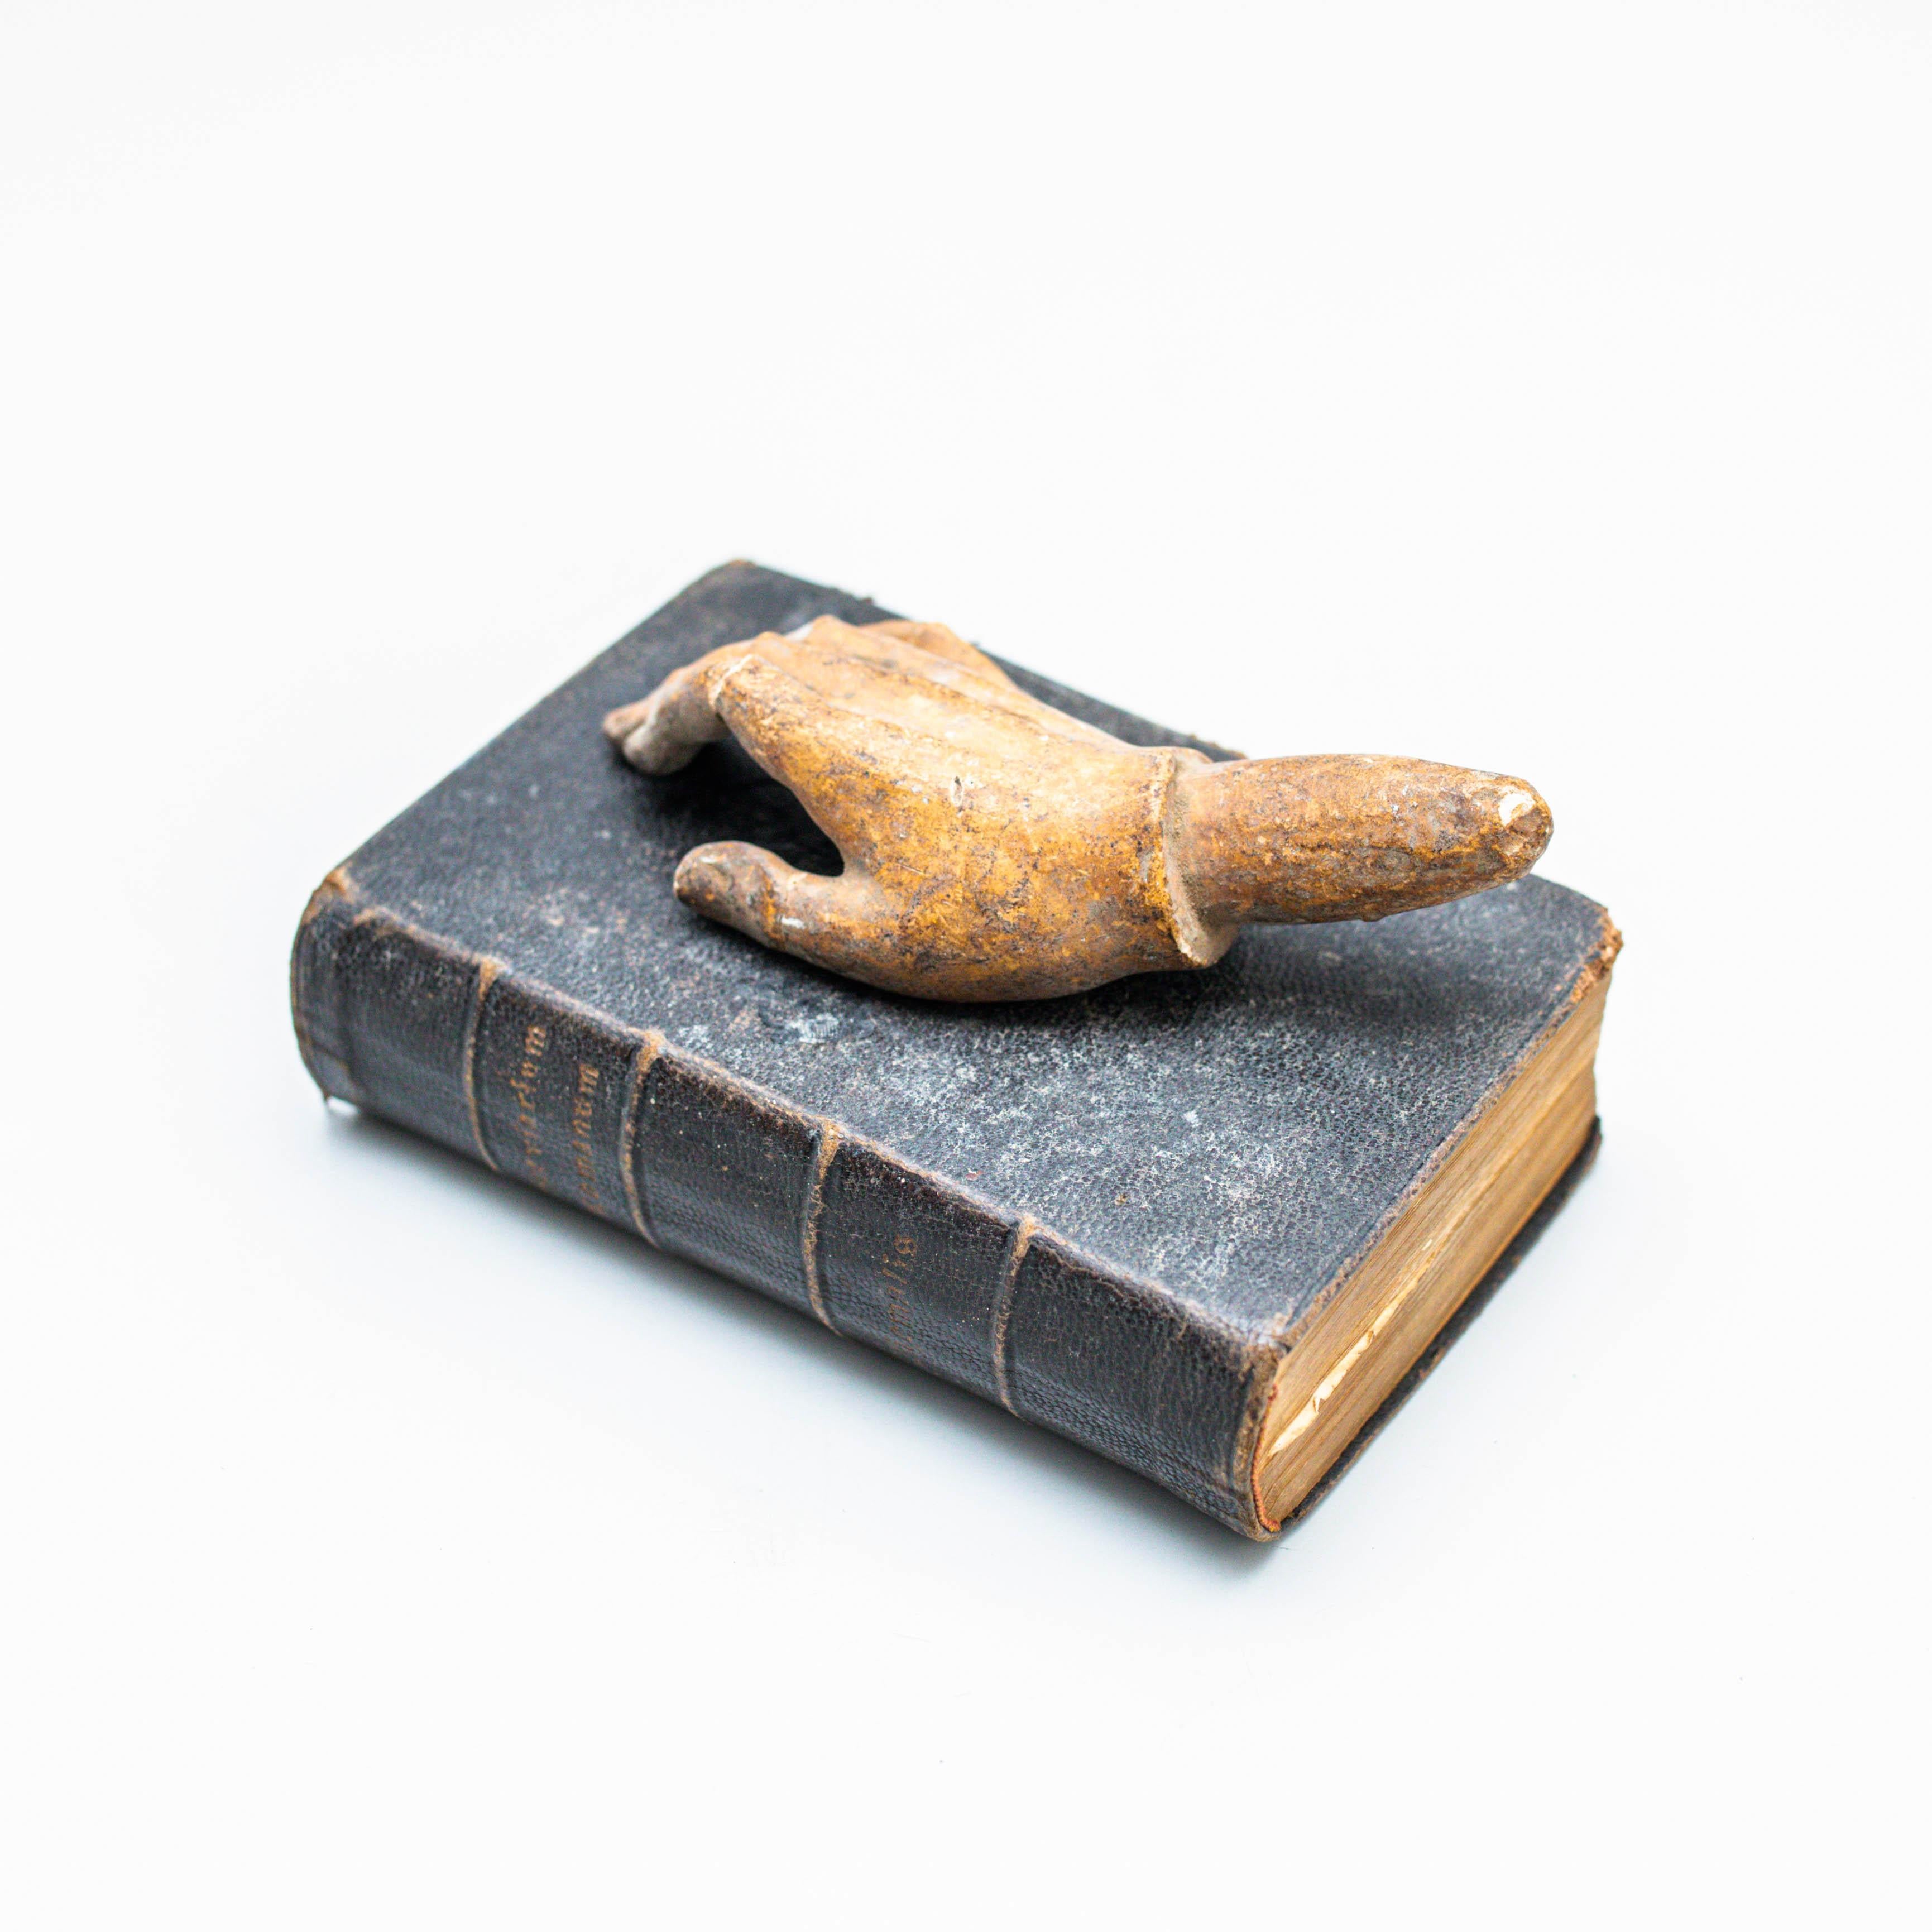 Artwork With Old Book and Mysterious Sculpture Hand, Circa 1990  For Sale 4